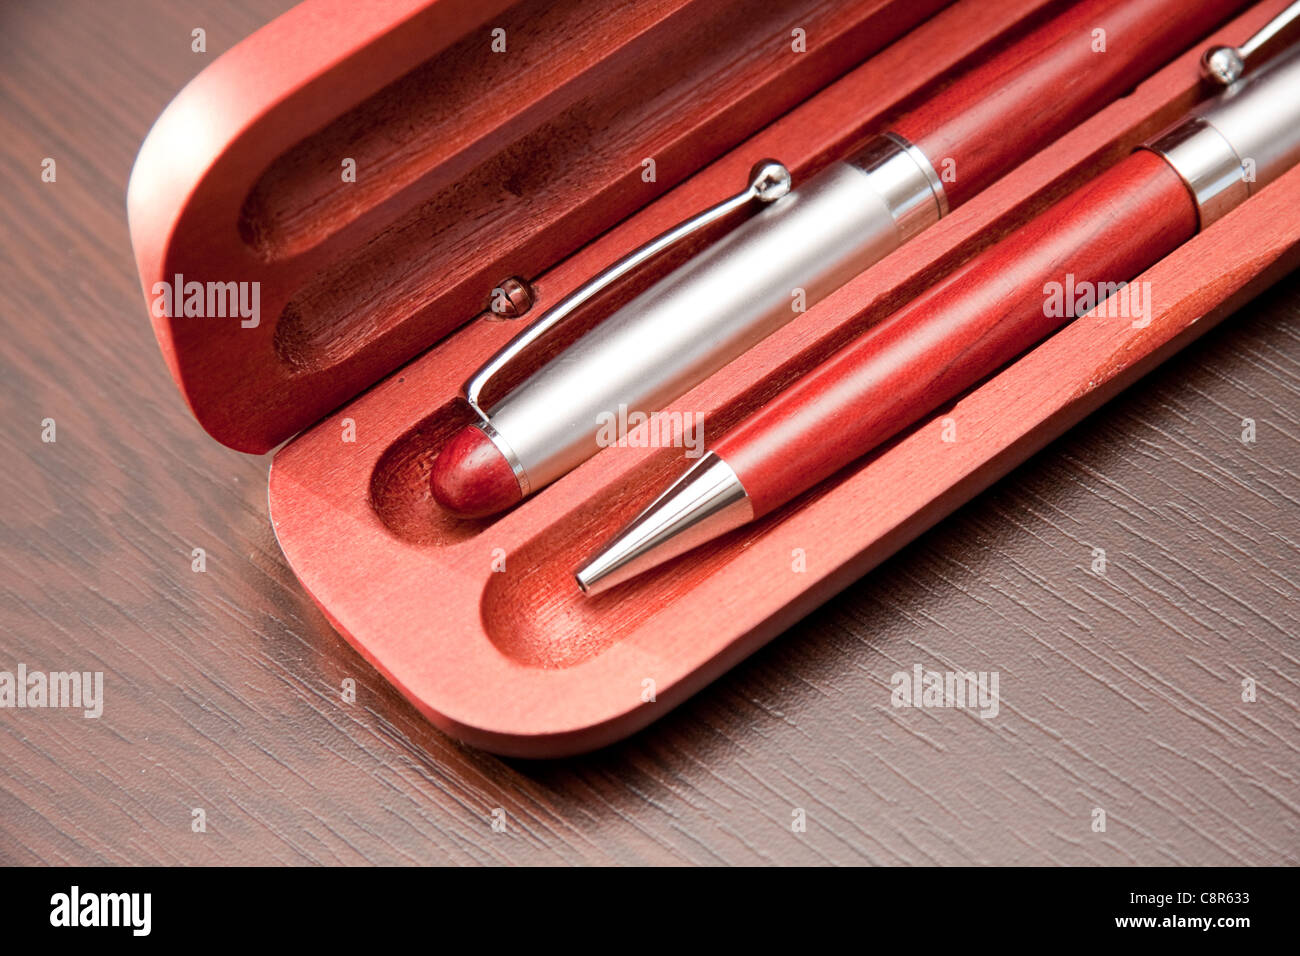 Pens on a table Stock Photo